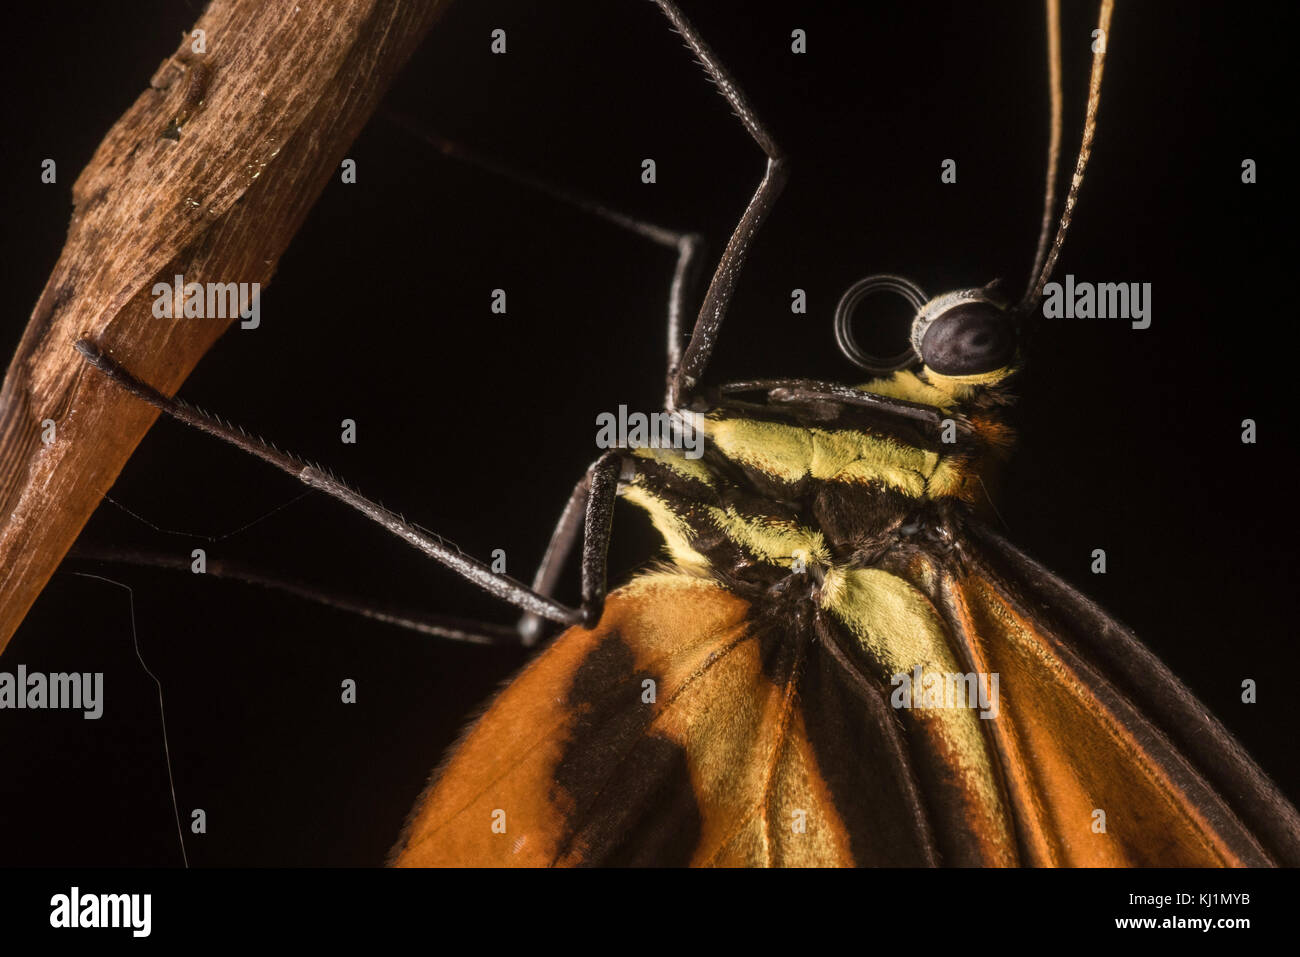 A close up look at a some finer details on a Heliconius butterfly from Peru. Stock Photo